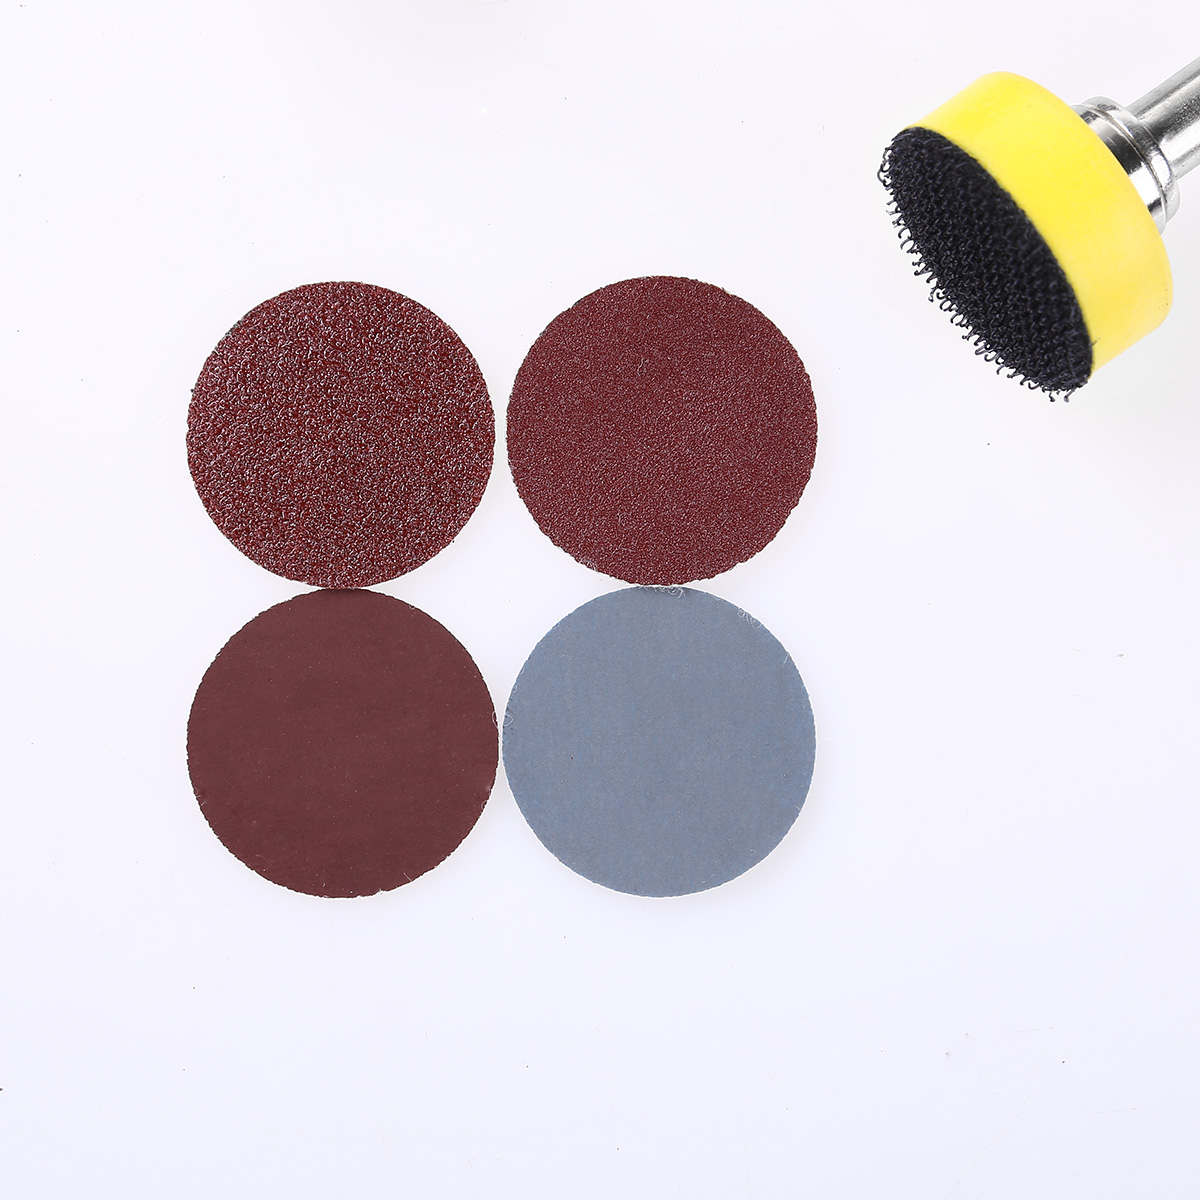 100Pc Abrasive Tools Sanding Discs Pad Kit with Shank Backer Plate for Drill Grinder Rotary Tools 100/180/240/1500/3000 Grits